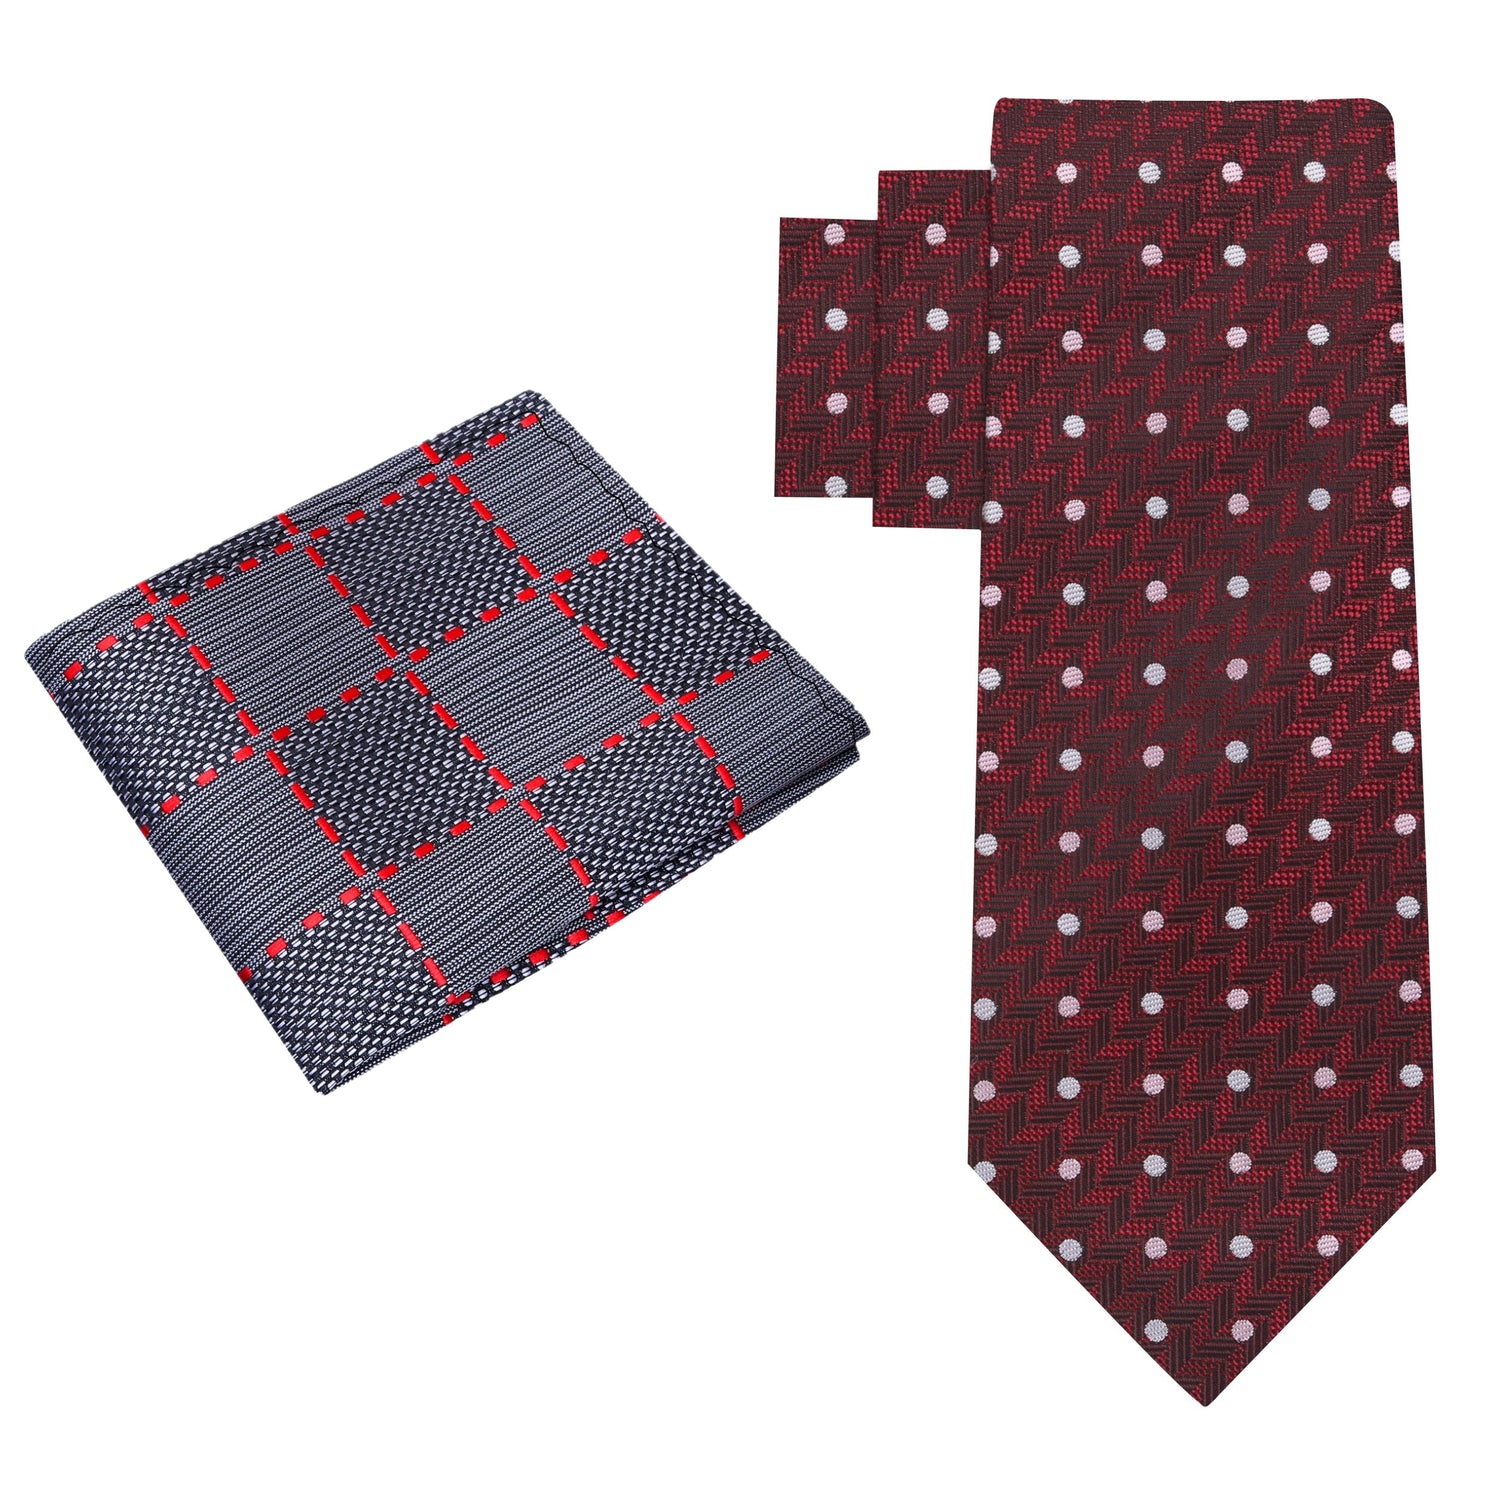 Alt View: Deep Red Herringbone with Dots Silk Necktie and Accenting Grey, Black Red Geometric Square